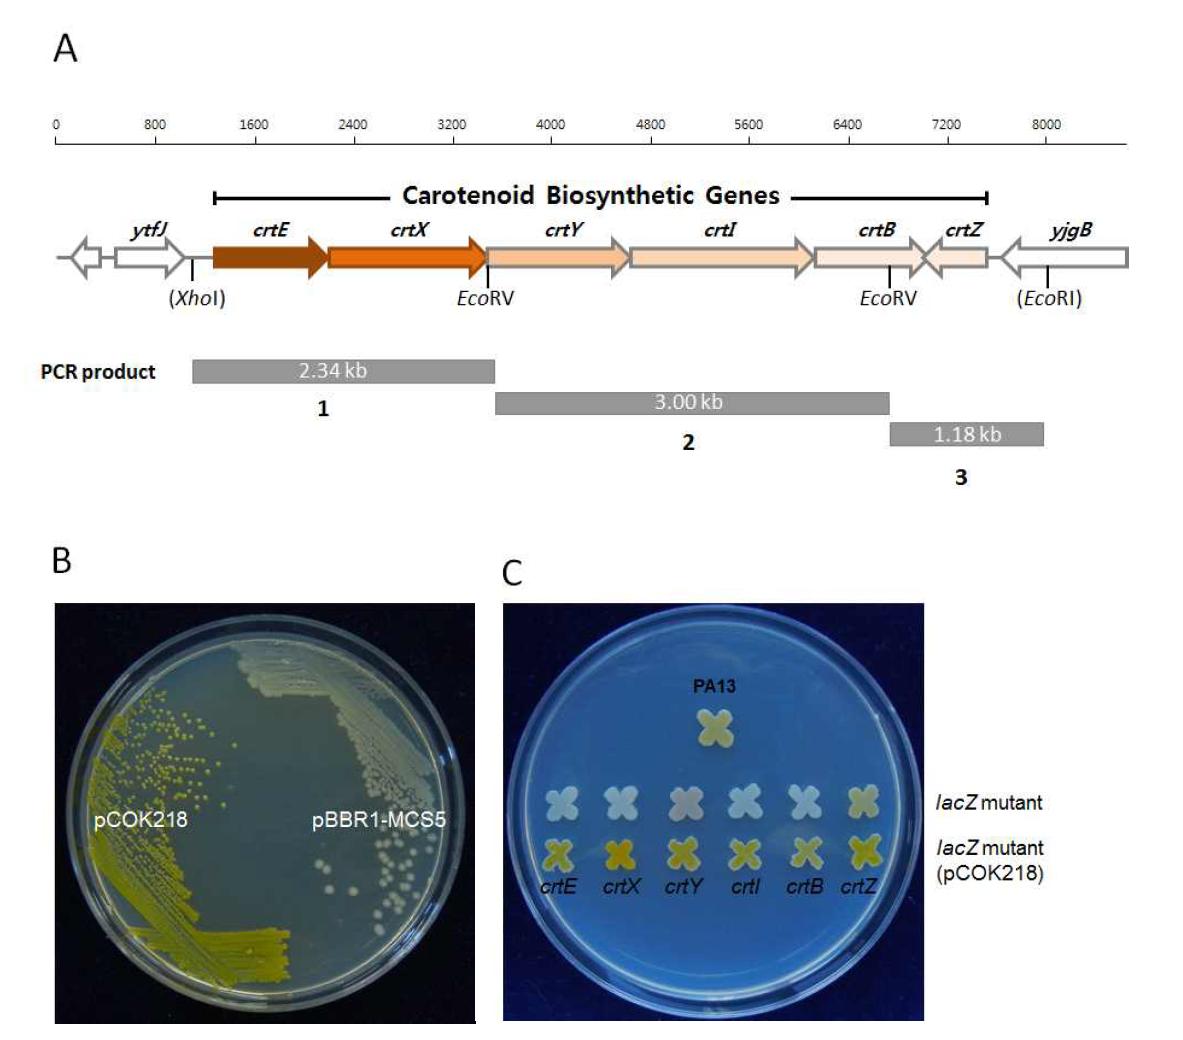 Genetic complementation study of carotenoid deficient mutants of P. ananatis. PCR products of carotenoid biosynthetic crtEXYIBZ genes were cloned into pBBR1-MCS5, generating pCOK218 (A). E. coli strain S17-1/λpir carrying pCOK218 produces carotenoid pigmentation (B). Carotenoid pigmentation phenotypes of deficient mutants were recovered by complementation with pCOK218 (C).